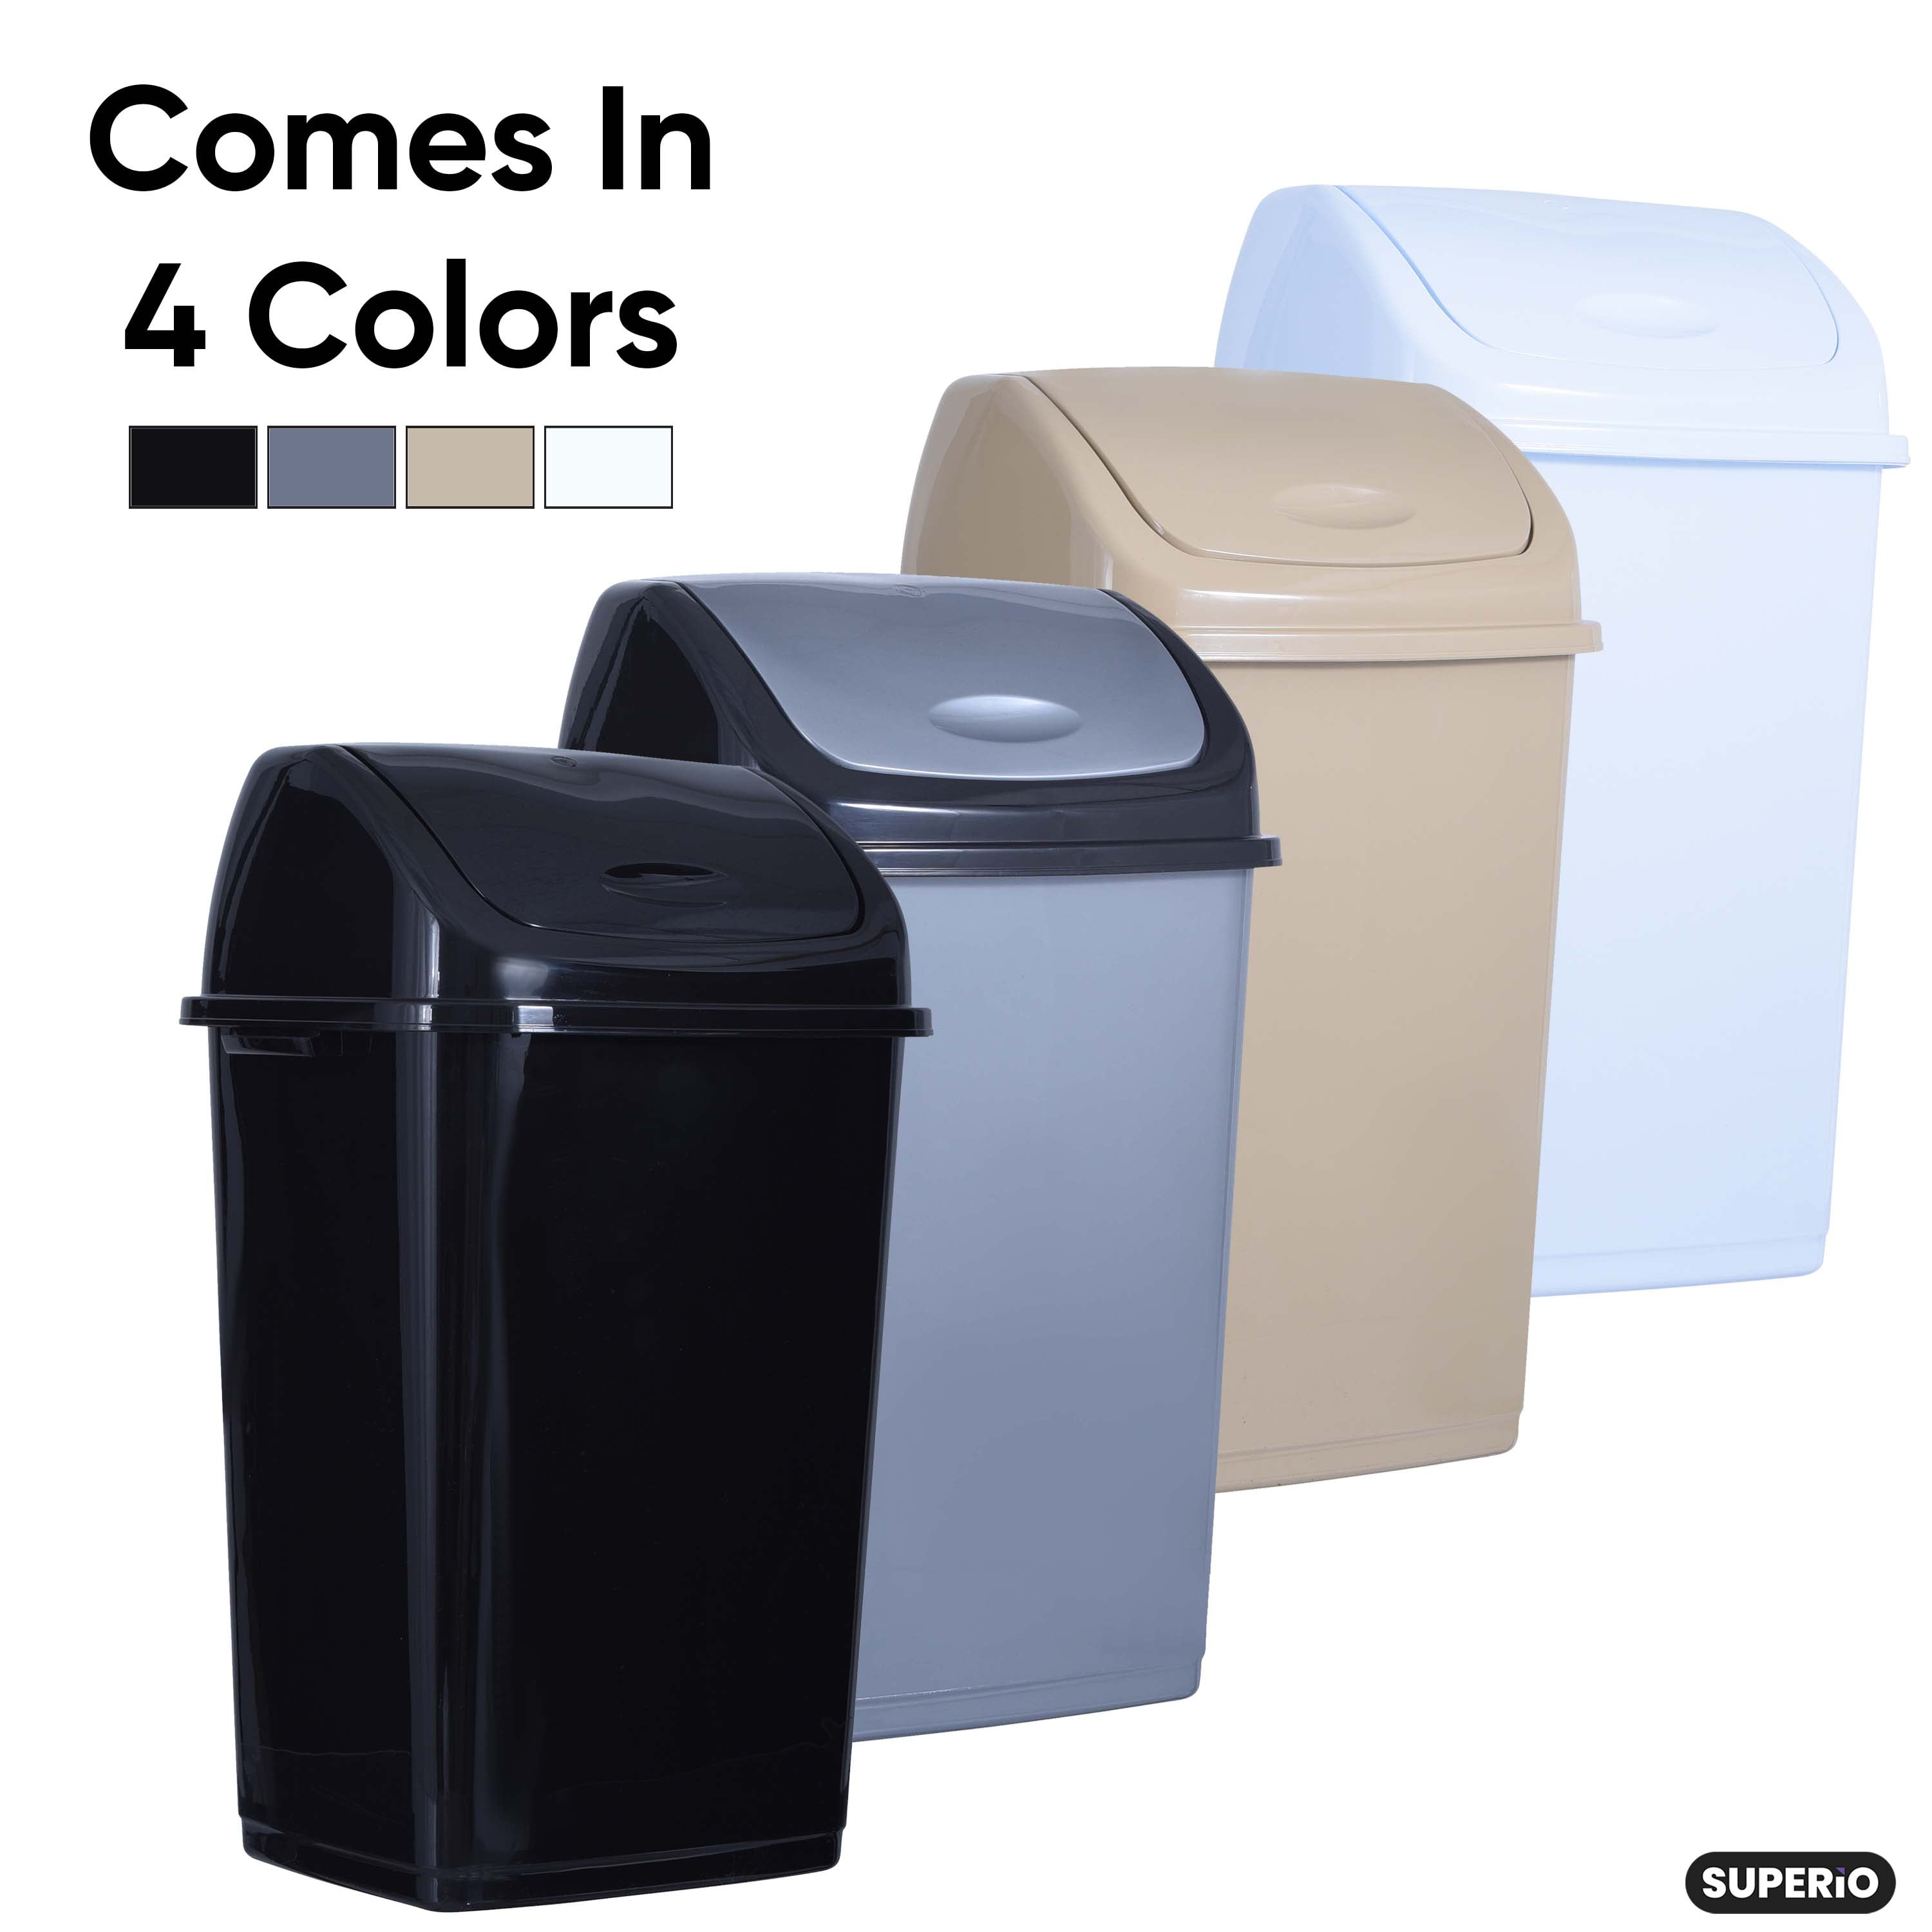  Superio Kitchen Trash Can 13 Gallon with Swing Lid, Plastic  Tall Garbage Can Outdoor and Indoor, Large 52 Qt Recycle Bin and Waste  Basket for Home, Office, Garage, Patio, Restaurant (Beige) 